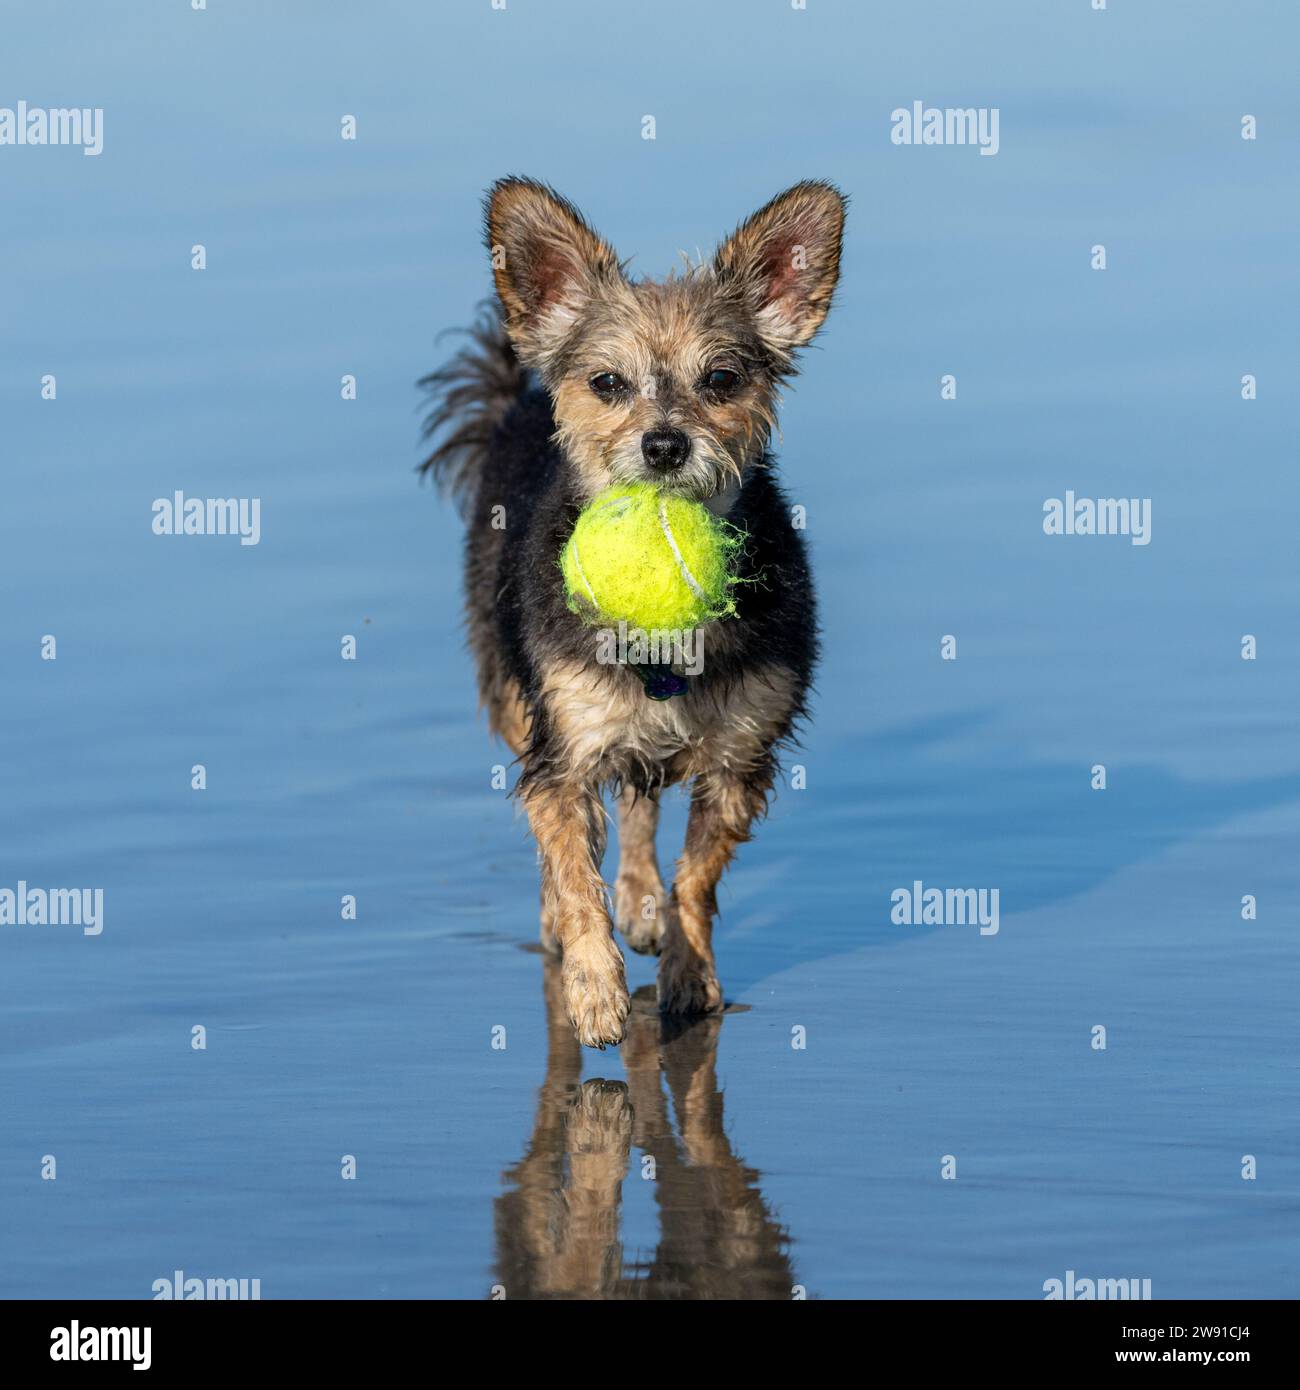 Yorkhire Terrier in the wet sand with her reflection carrying a ball towards the camera Stock Photo